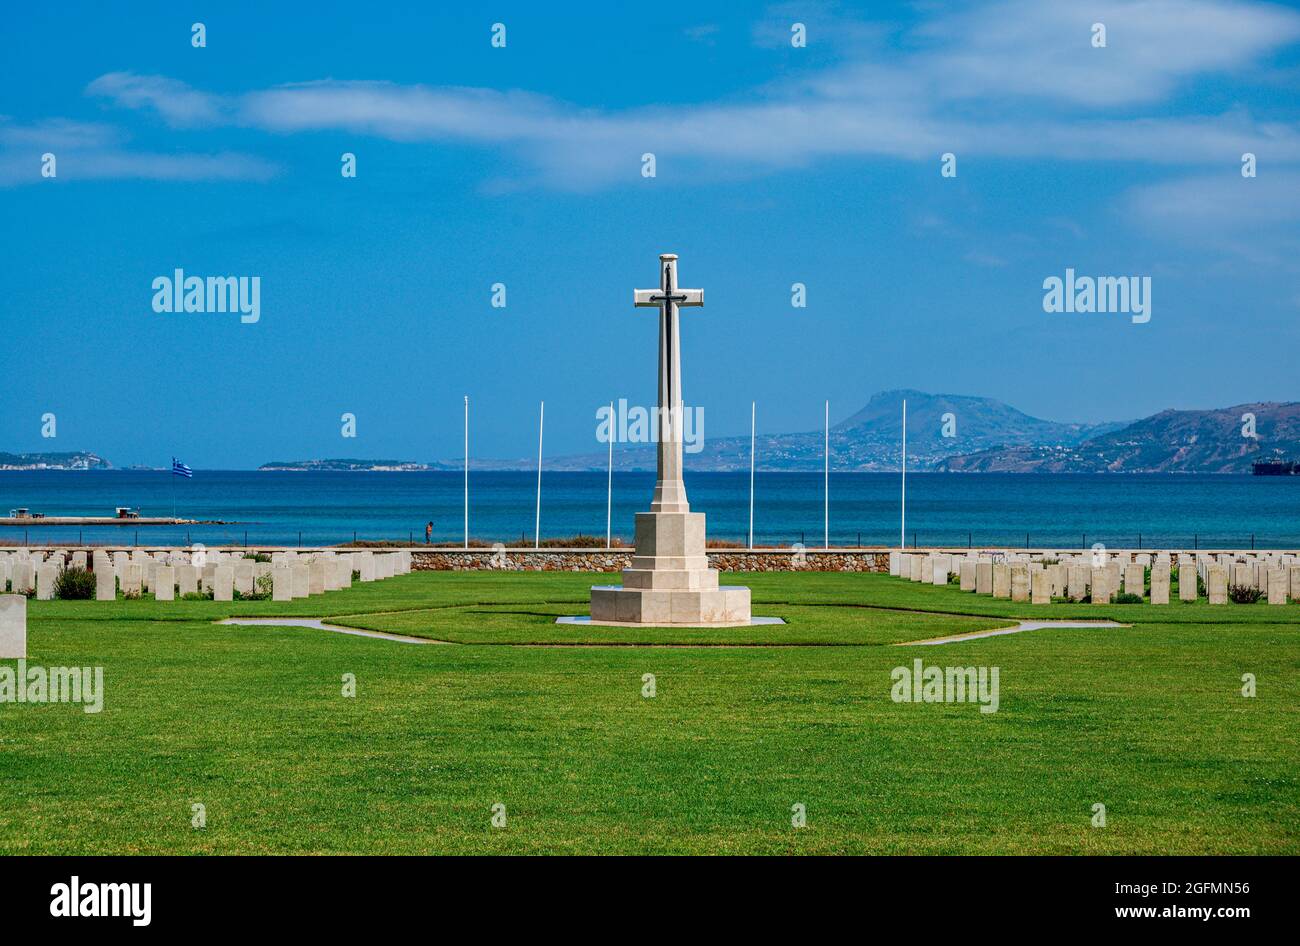 Suda Bay War Cemetery, near Chania (Xania) on the island of Crete, Greece - With automatic watering system in operation Stock Photo